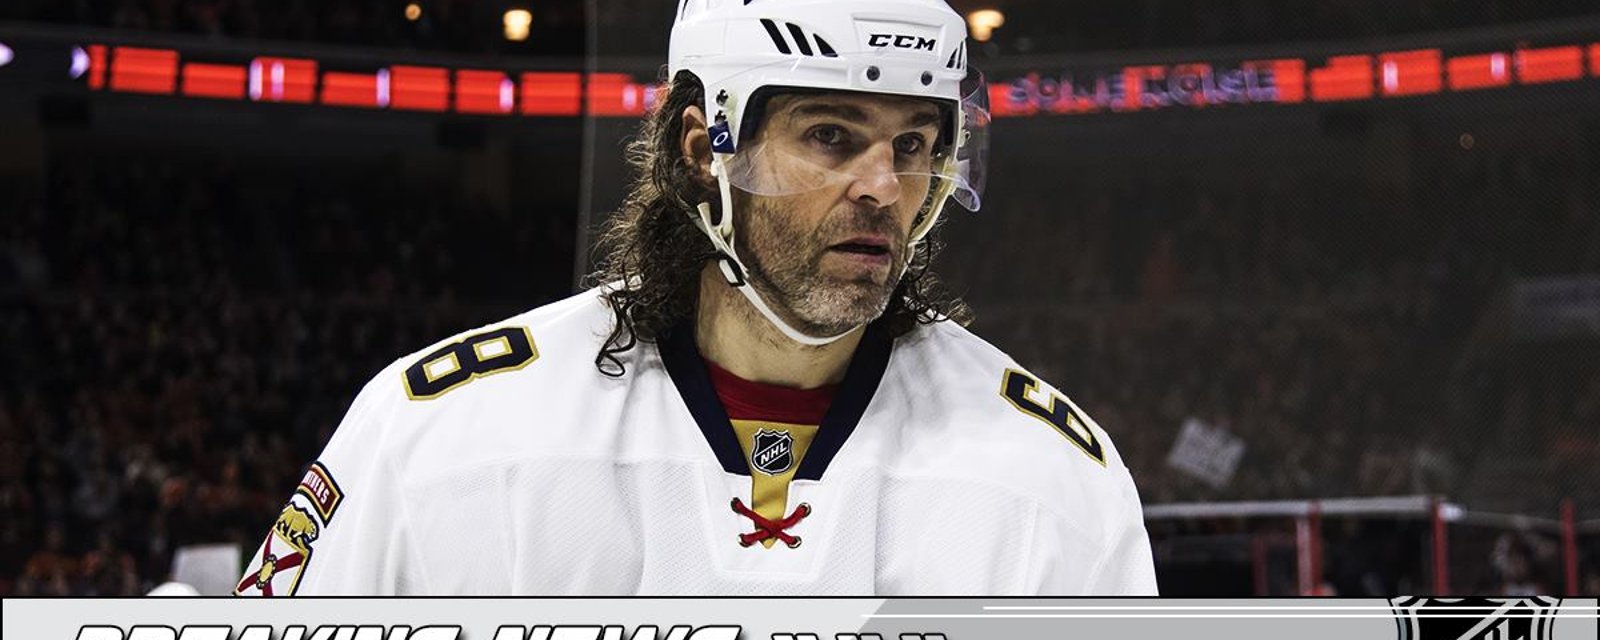 Breaking: Jaromir Jagr could be leaving the Florida Panthers.